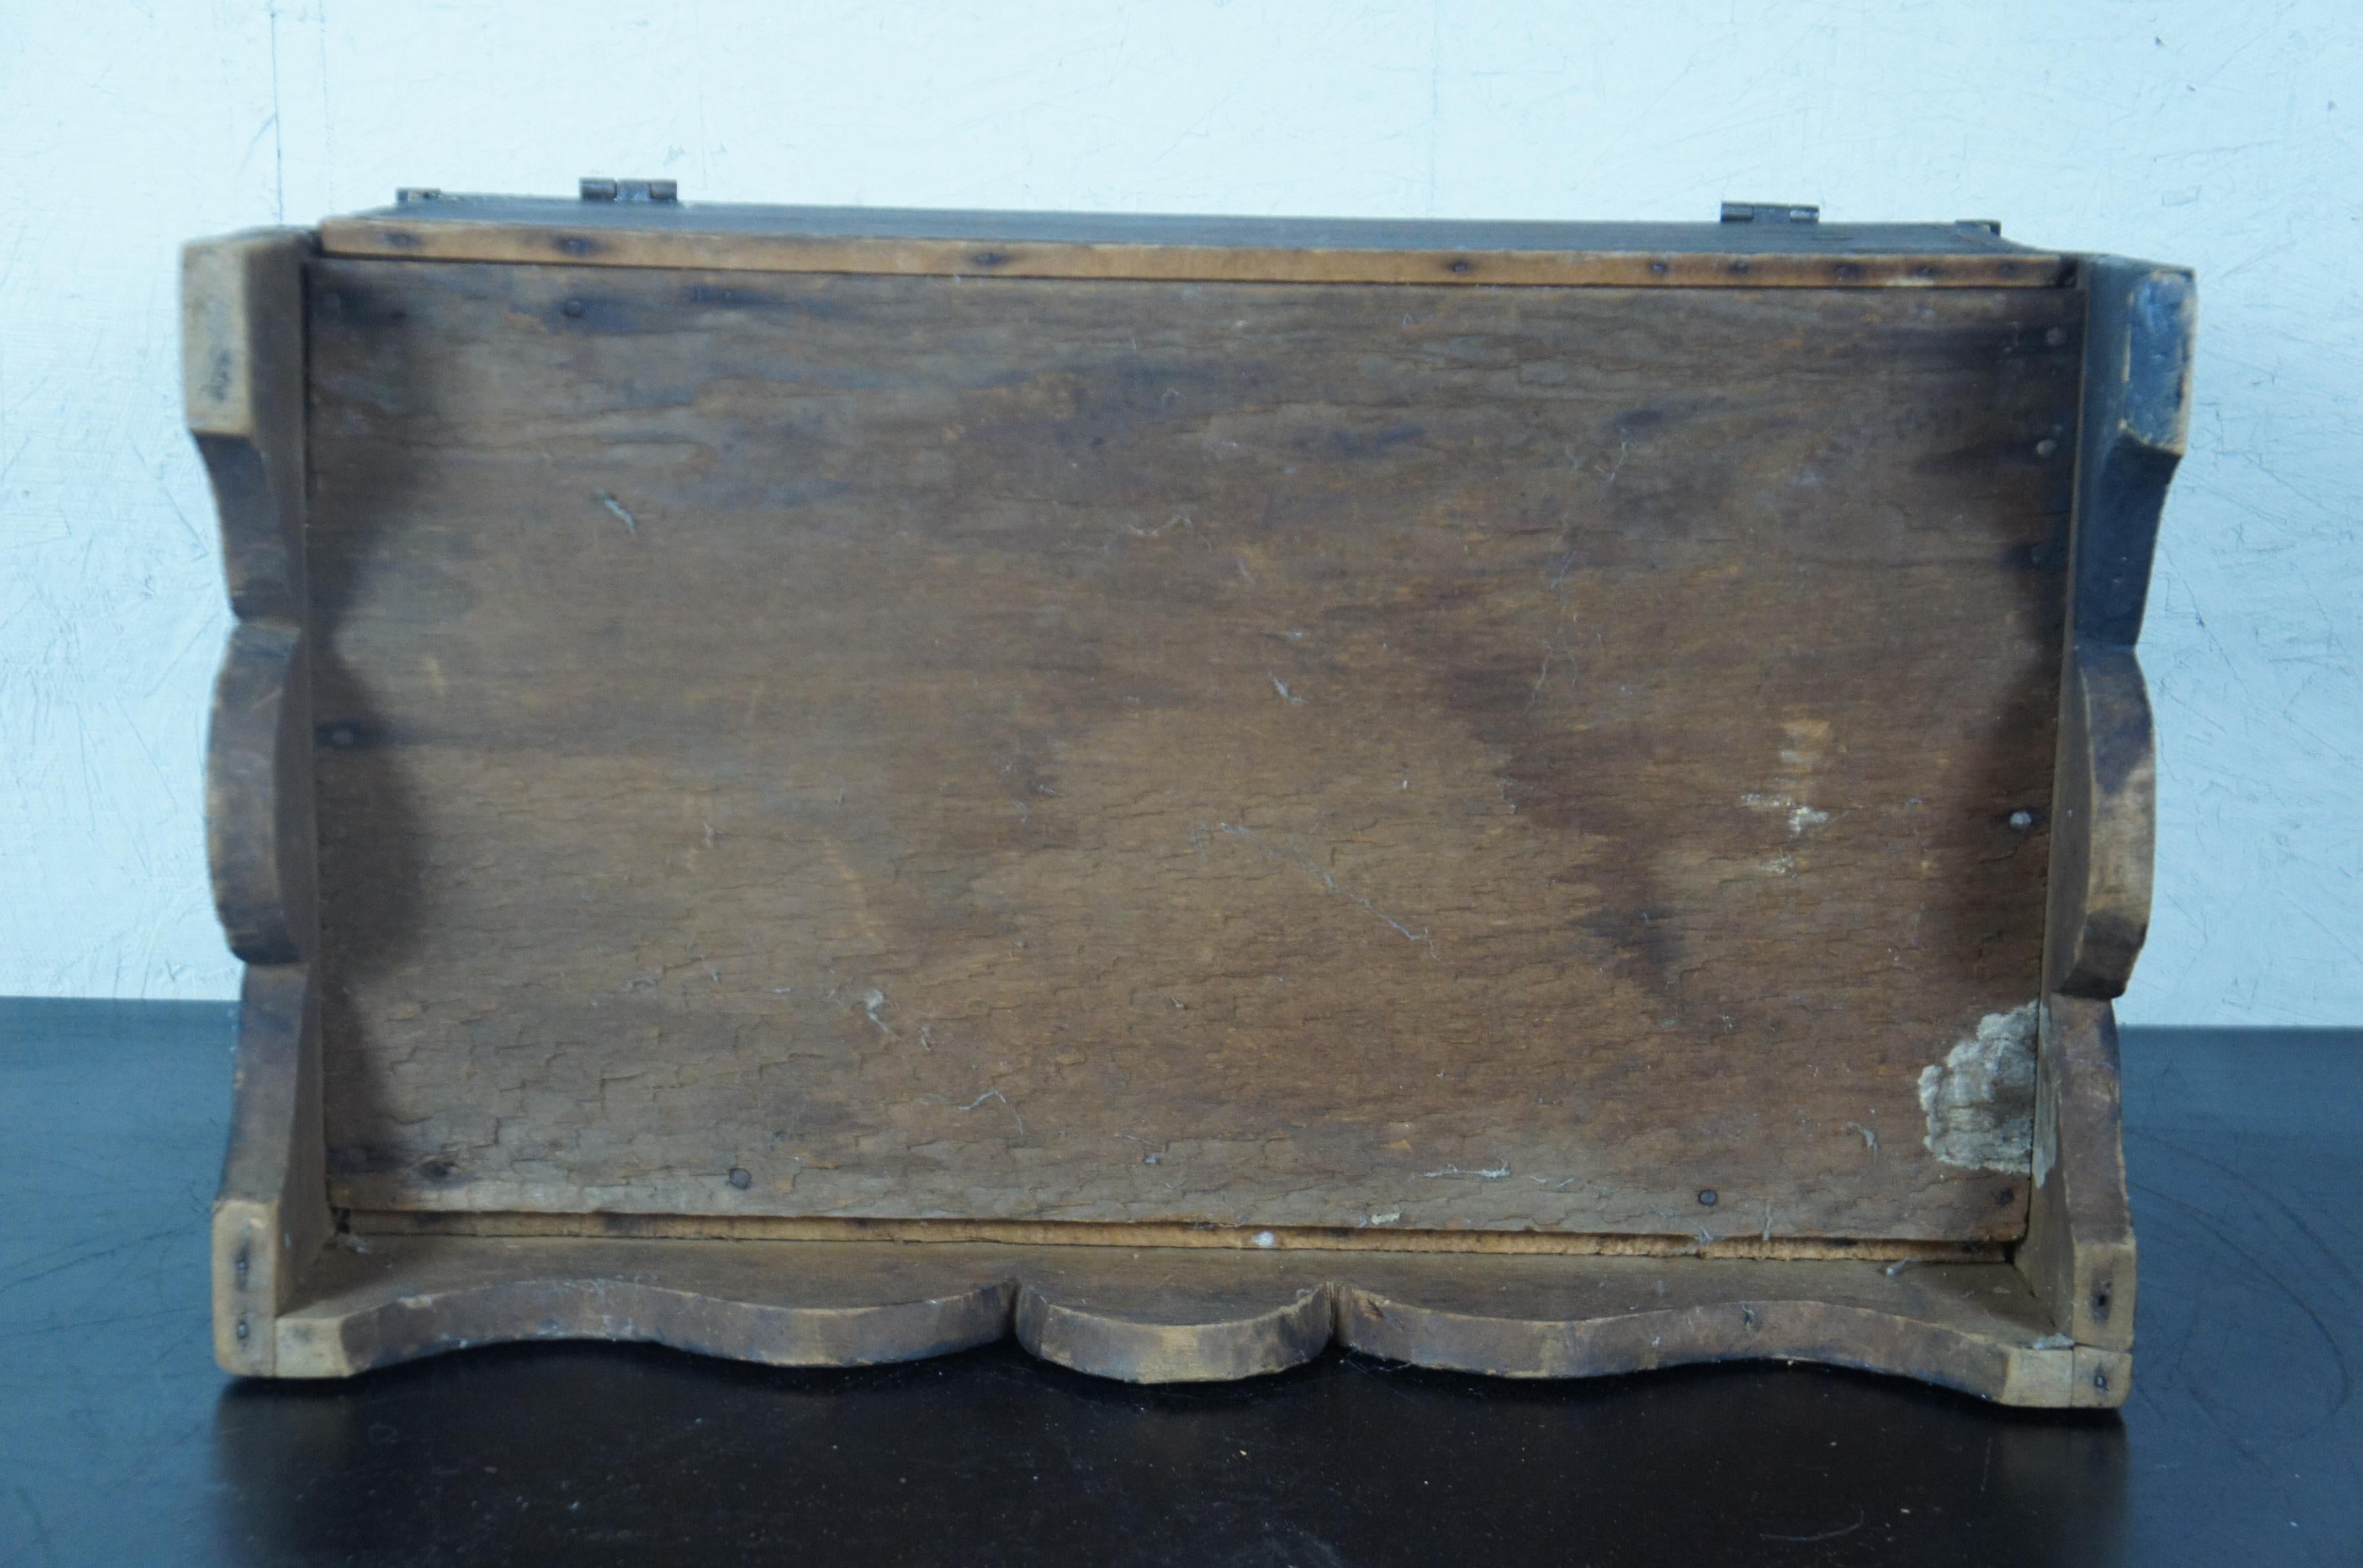 Hardwood Antique Early American Painted Wood Hope Chest Trunk Toy Storage Salesman Sample